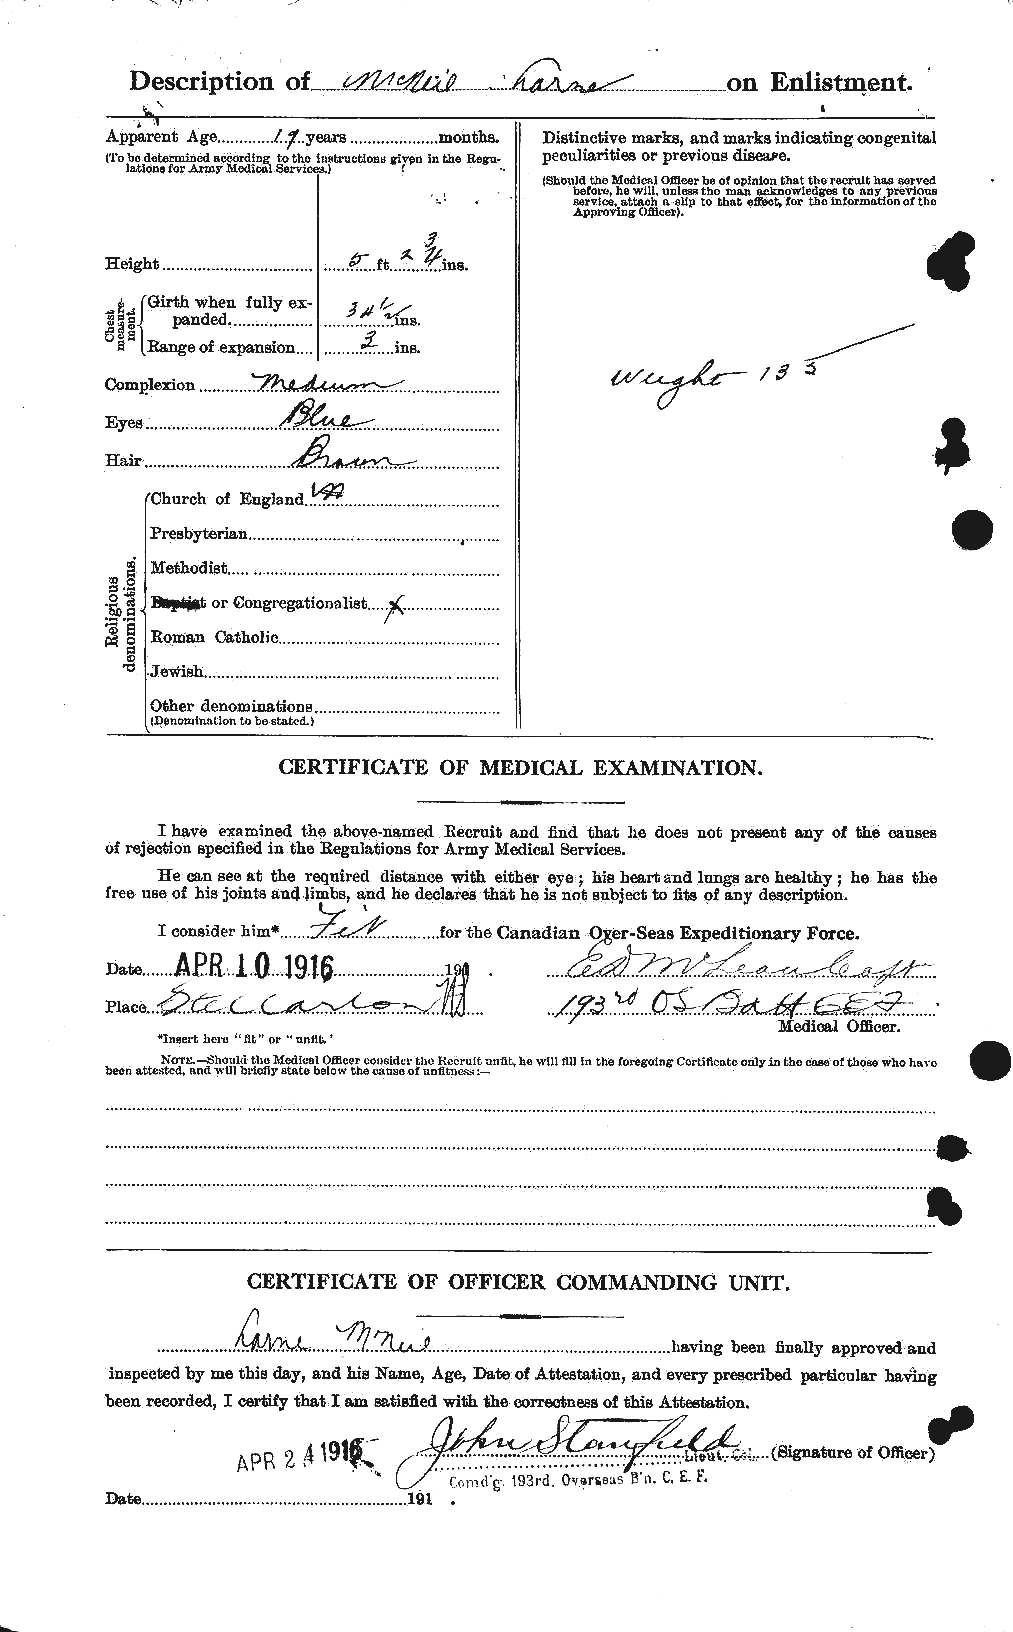 Personnel Records of the First World War - CEF 542386b